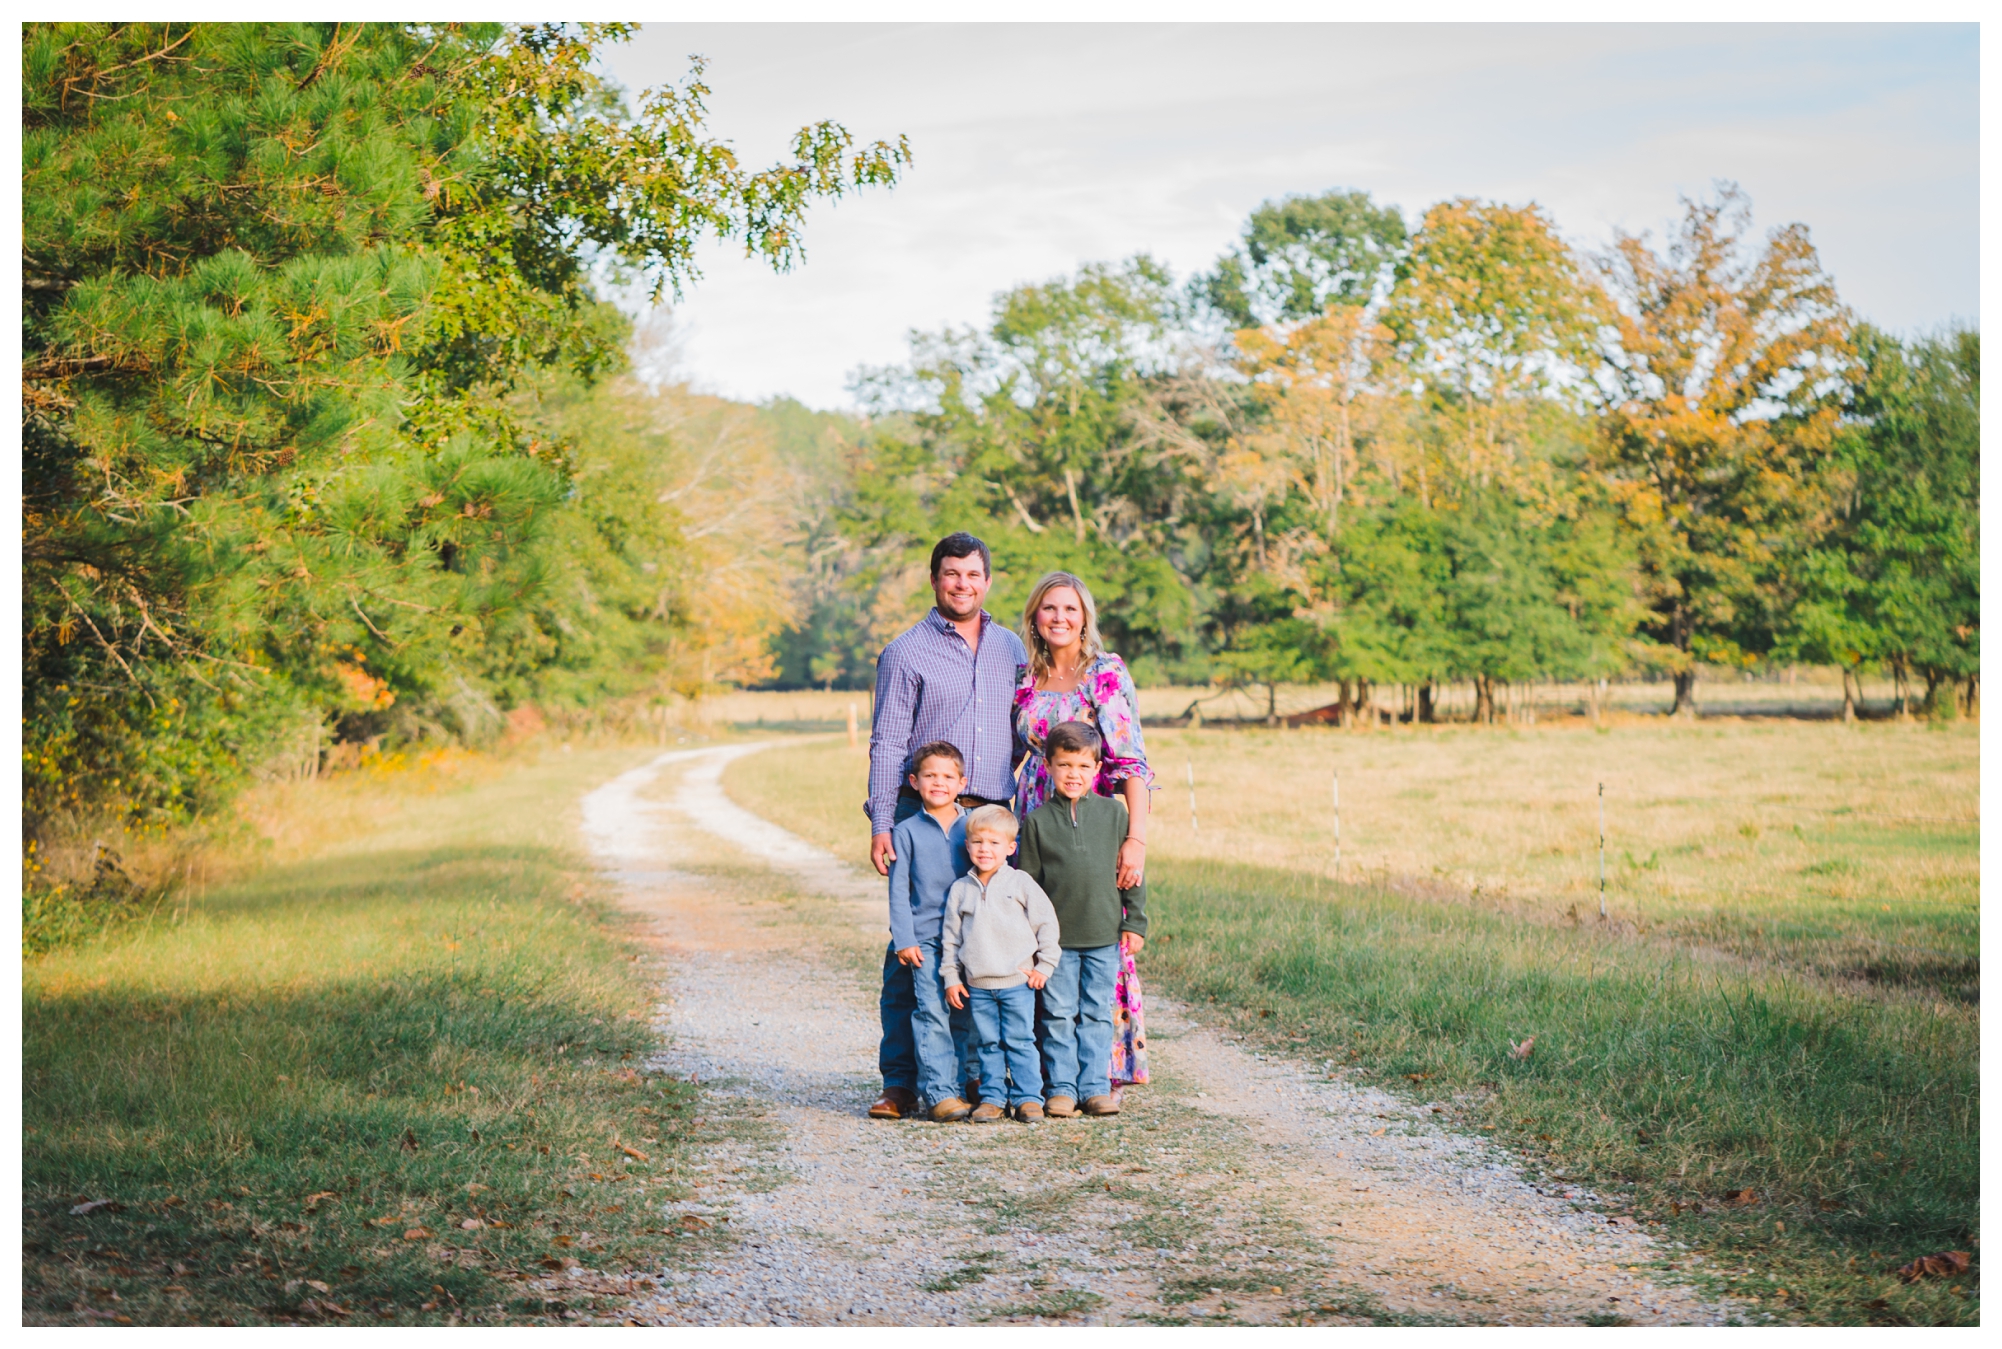 Family standing on dirt road in fall | Melissa Sheridan Photography